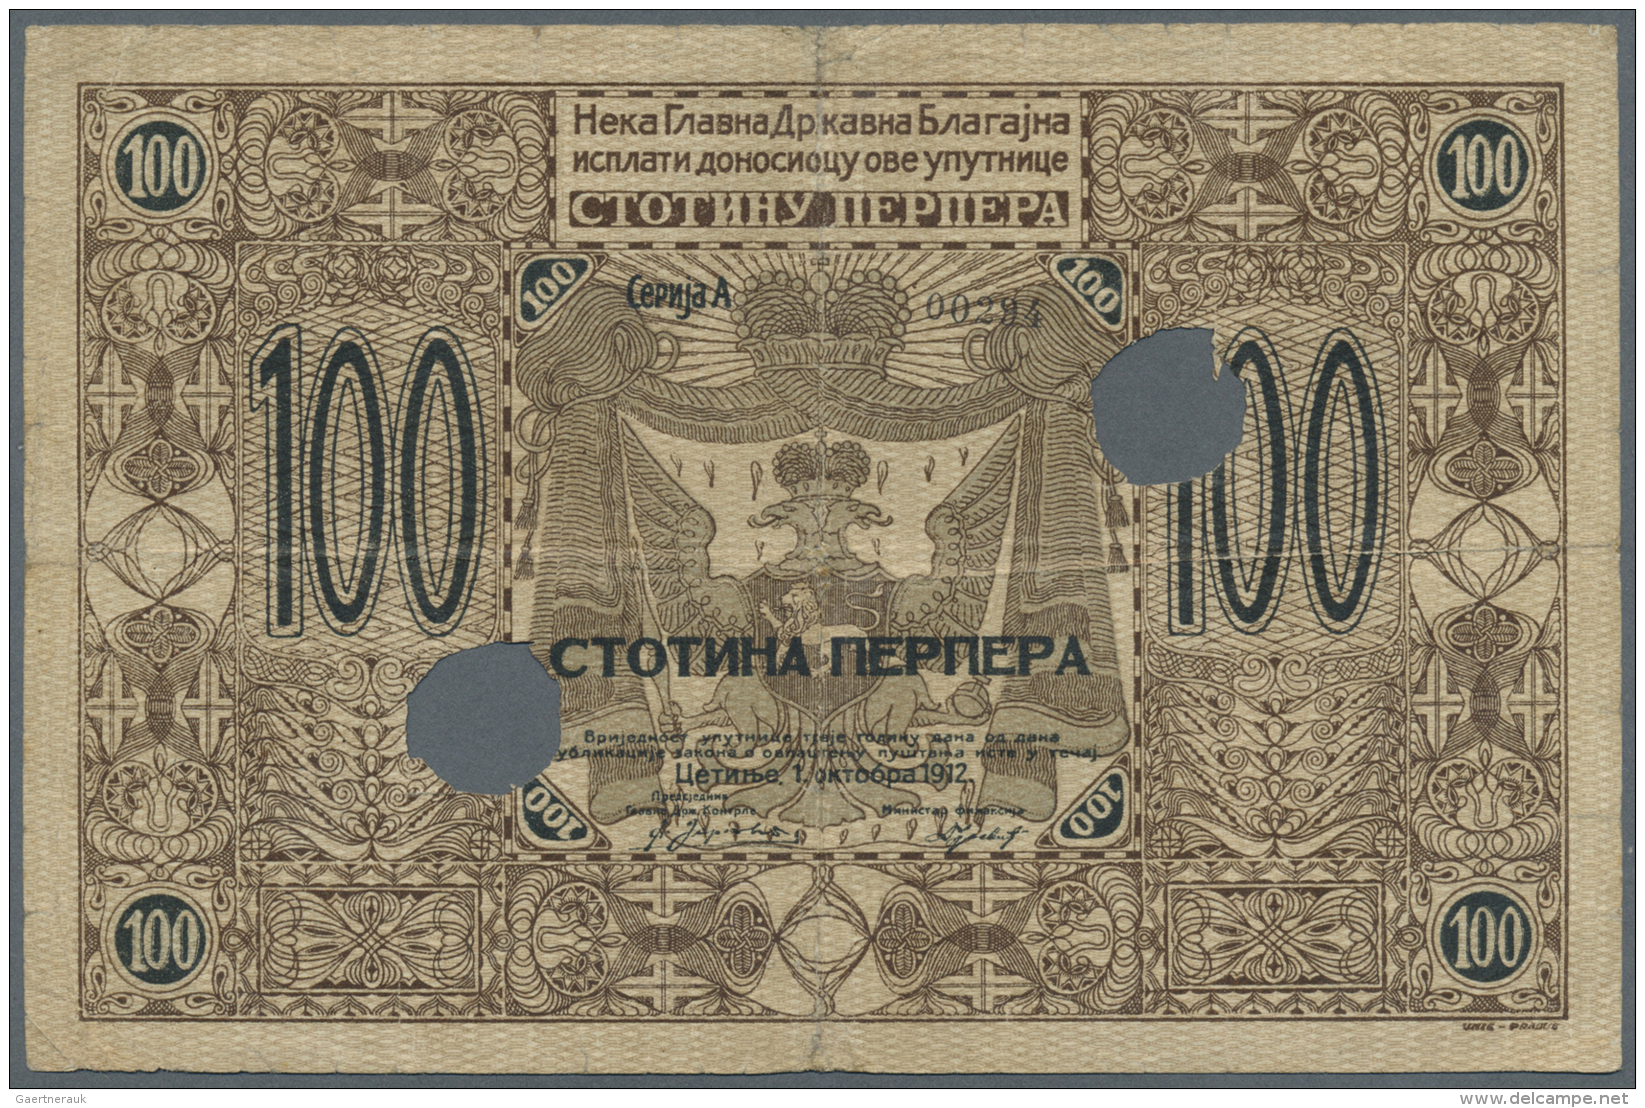 Montenegro: 100 Perper 1912 P. 6, Very Rare Note, 2 Bank Cancellation Holes, Stronger Center And Horizontal Fold, Repair - Other - Europe